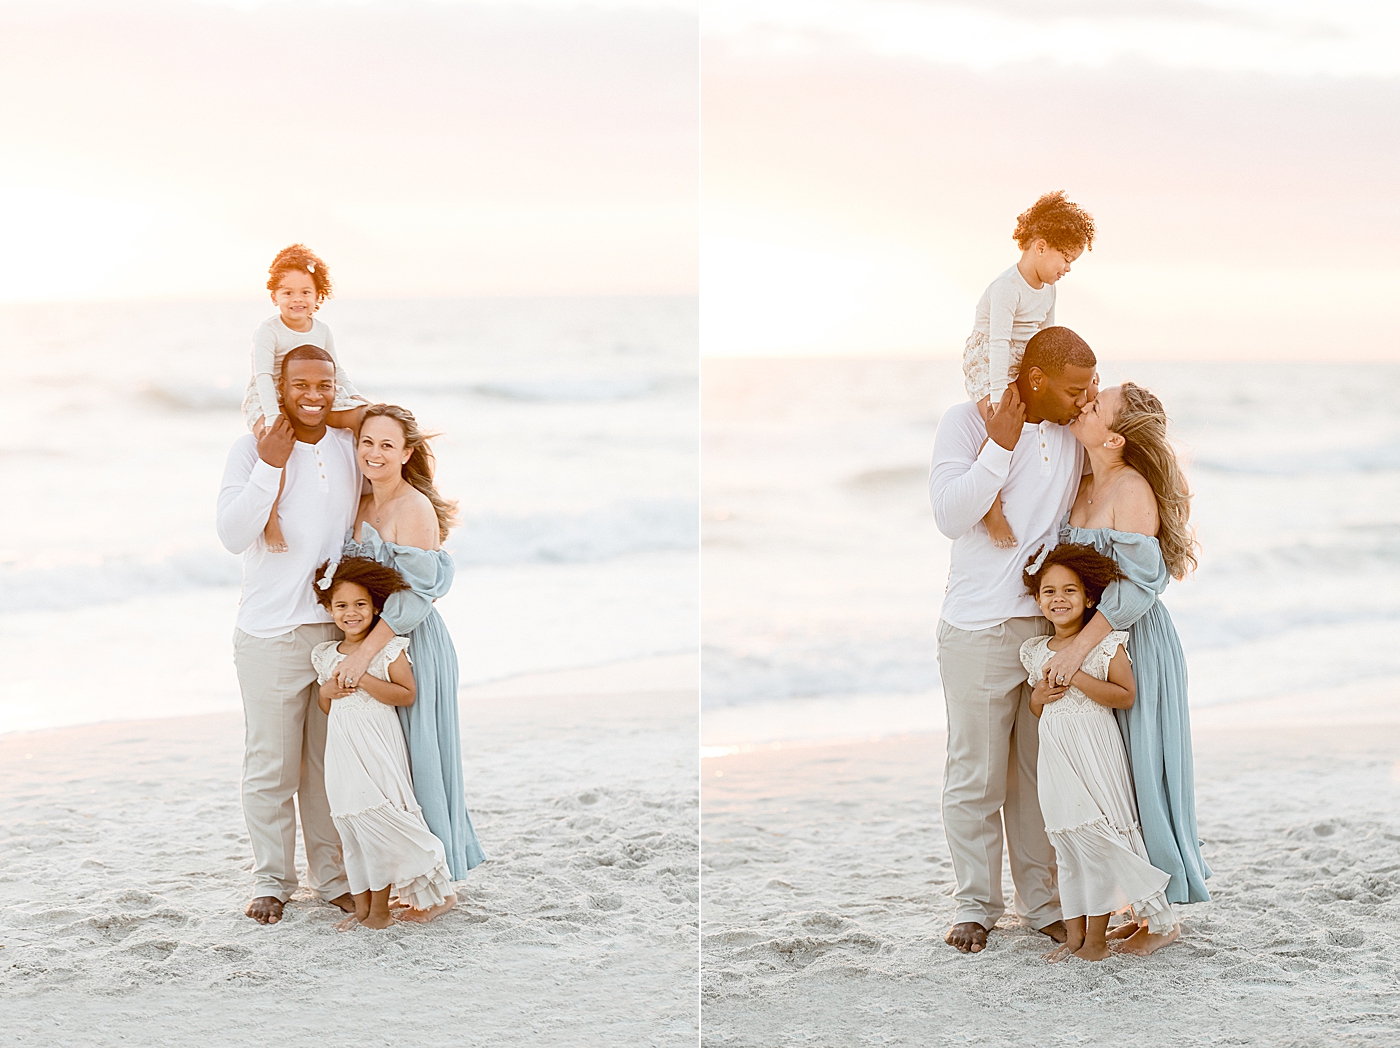 Sunset beach session for family of four in Tampa. Photo by Brittany Elise Photography.